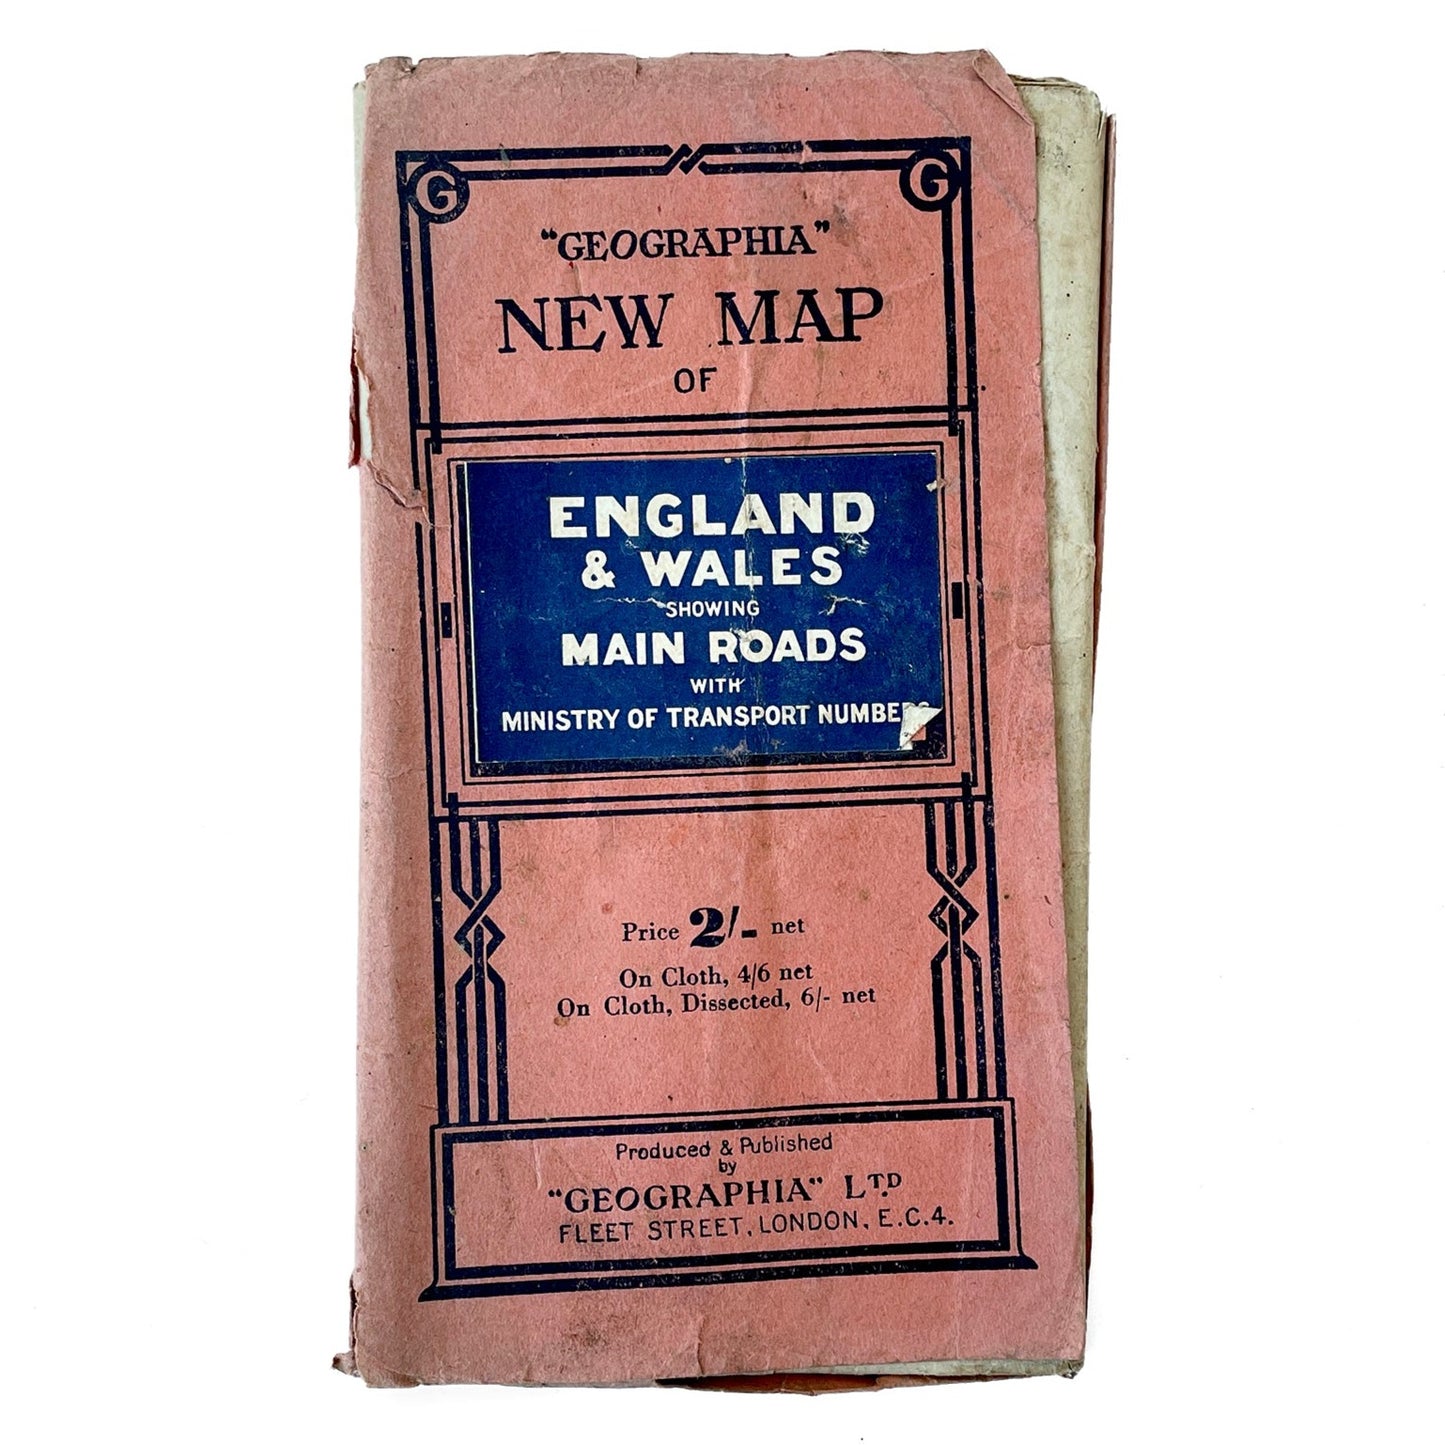 Geographia New Map of England & Wales – With Cover - Sukie